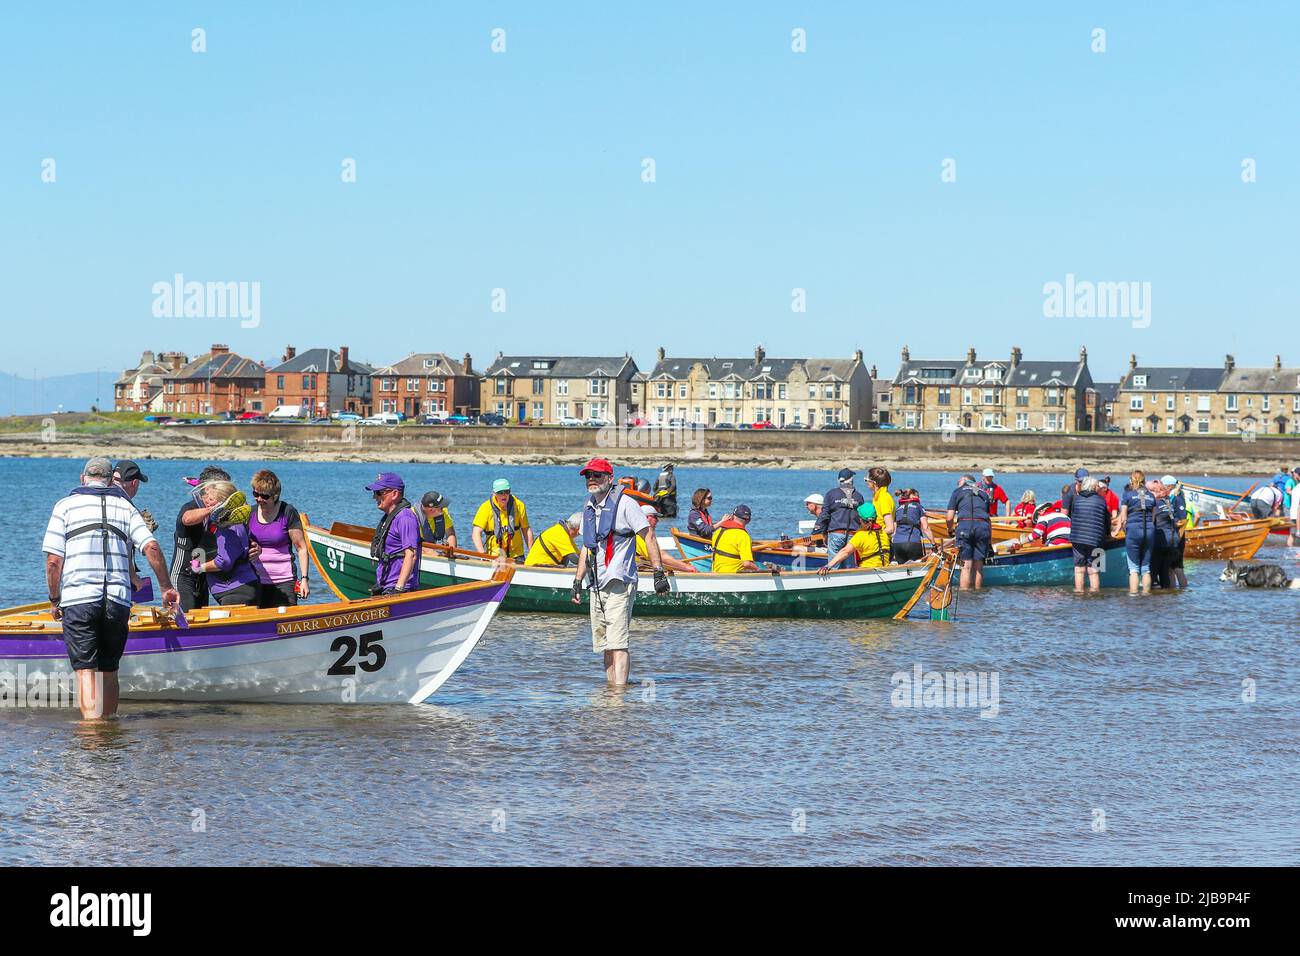 Troon, UK. 04th June, 2022. 04 June 2022. Troon, UK. Troon Coastal Rowing Club (TCRC) held its annual regatta on the Firth of Clyde sailing from south beach Troon, Ayrshire, UK. The small boats are traditional, hand crafted, wooden, 4 crew, fishing skiffs, based on a 300 year old design. The race requires the competitors to row a set course of not less than 2 kilometres, leaving from the shore and on return, a team member has to take a stick of Troon rock (confectionery} and run to the finish line with it. The event attracted competitors from various coastal rowing clubs across Scotland Stock Photo